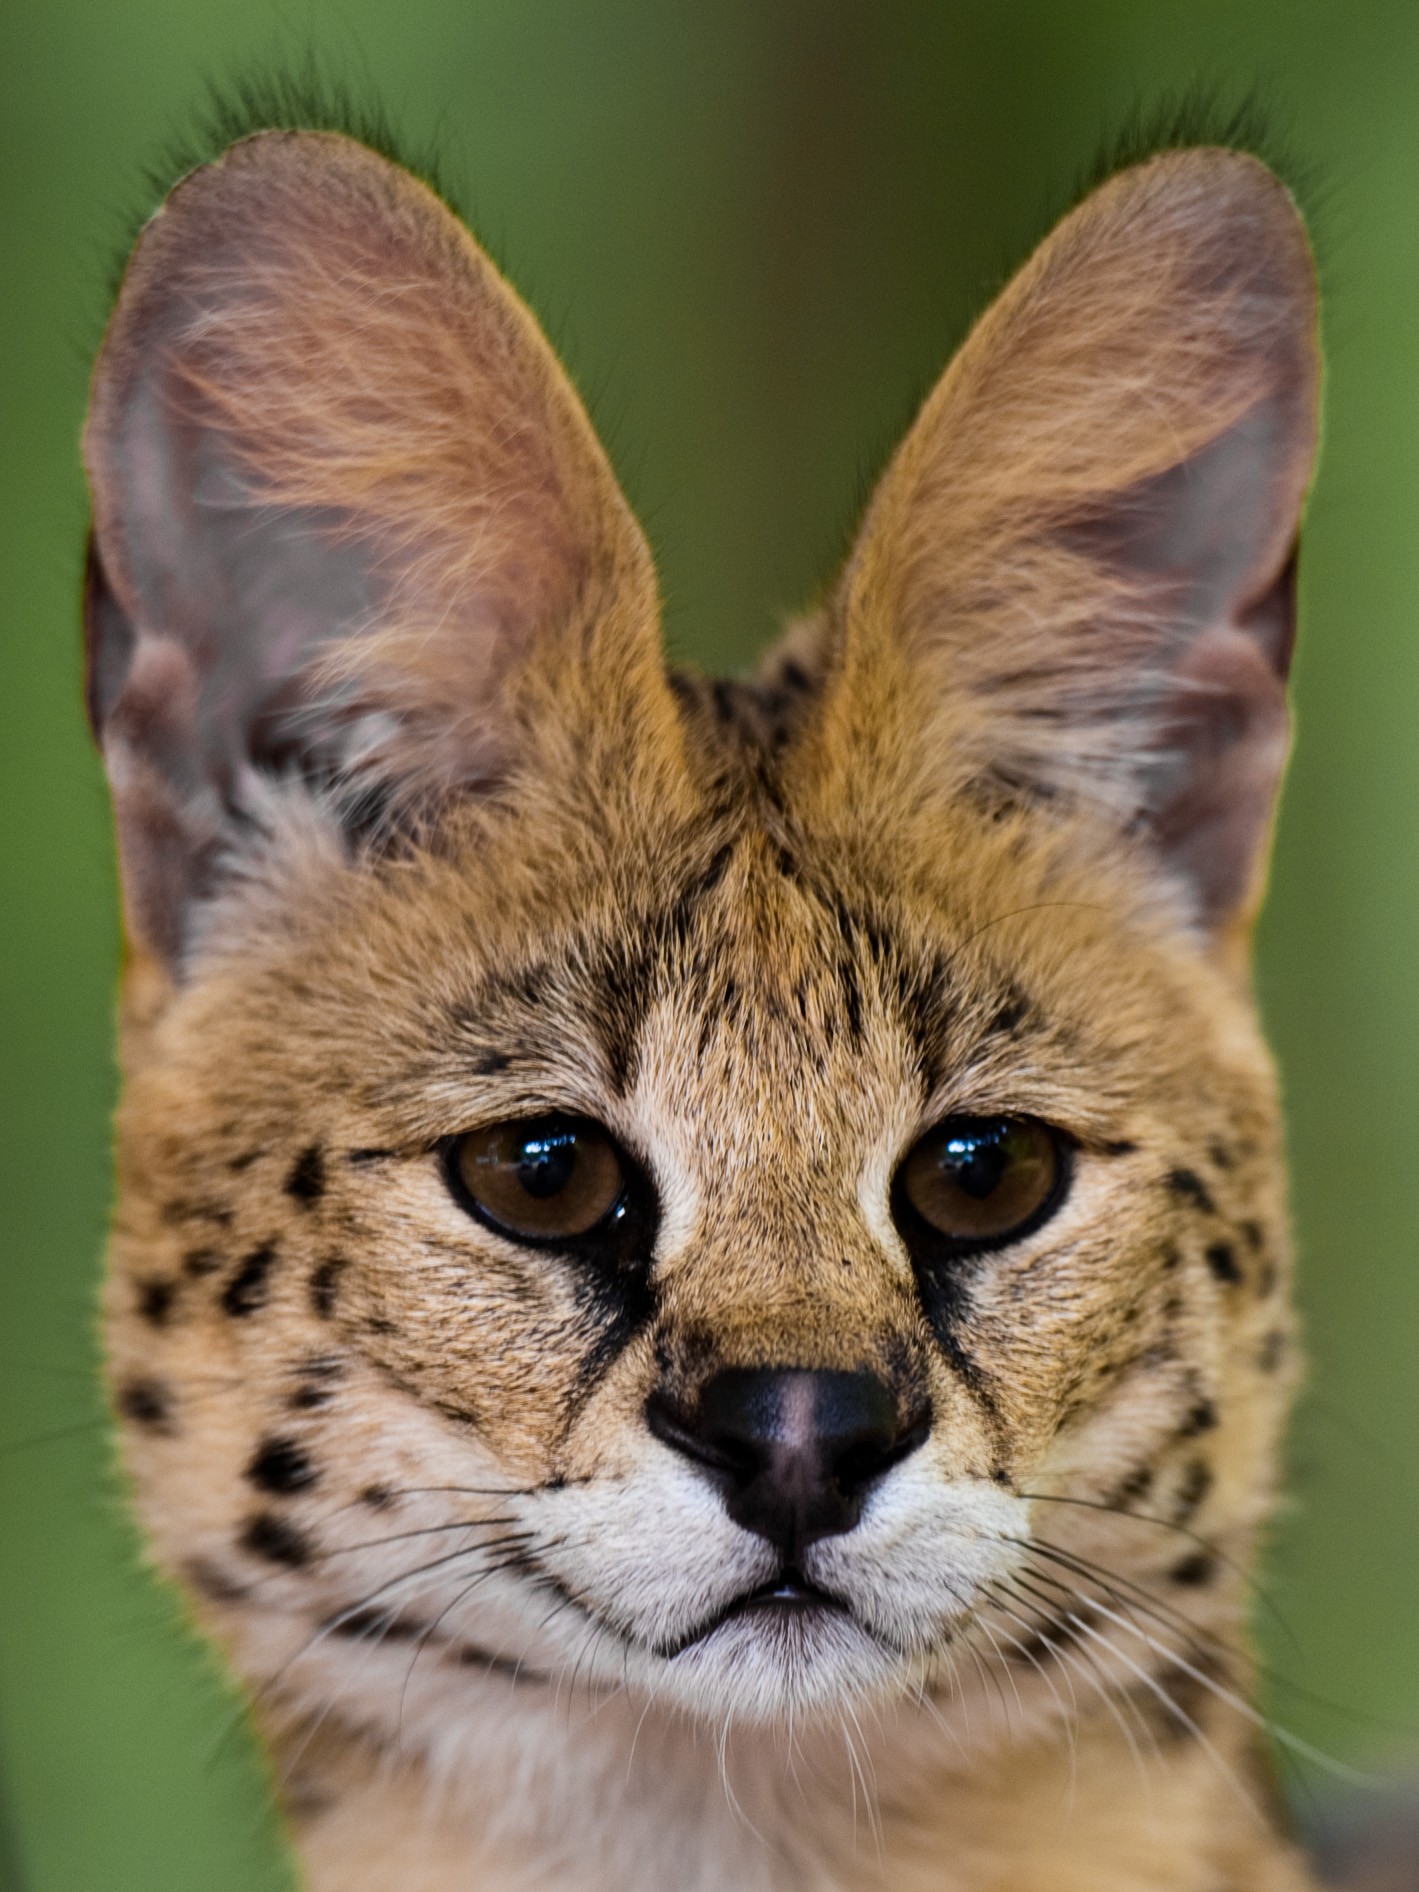 21 Things To Know Before Caring For An African Serval Cat TeleTalk